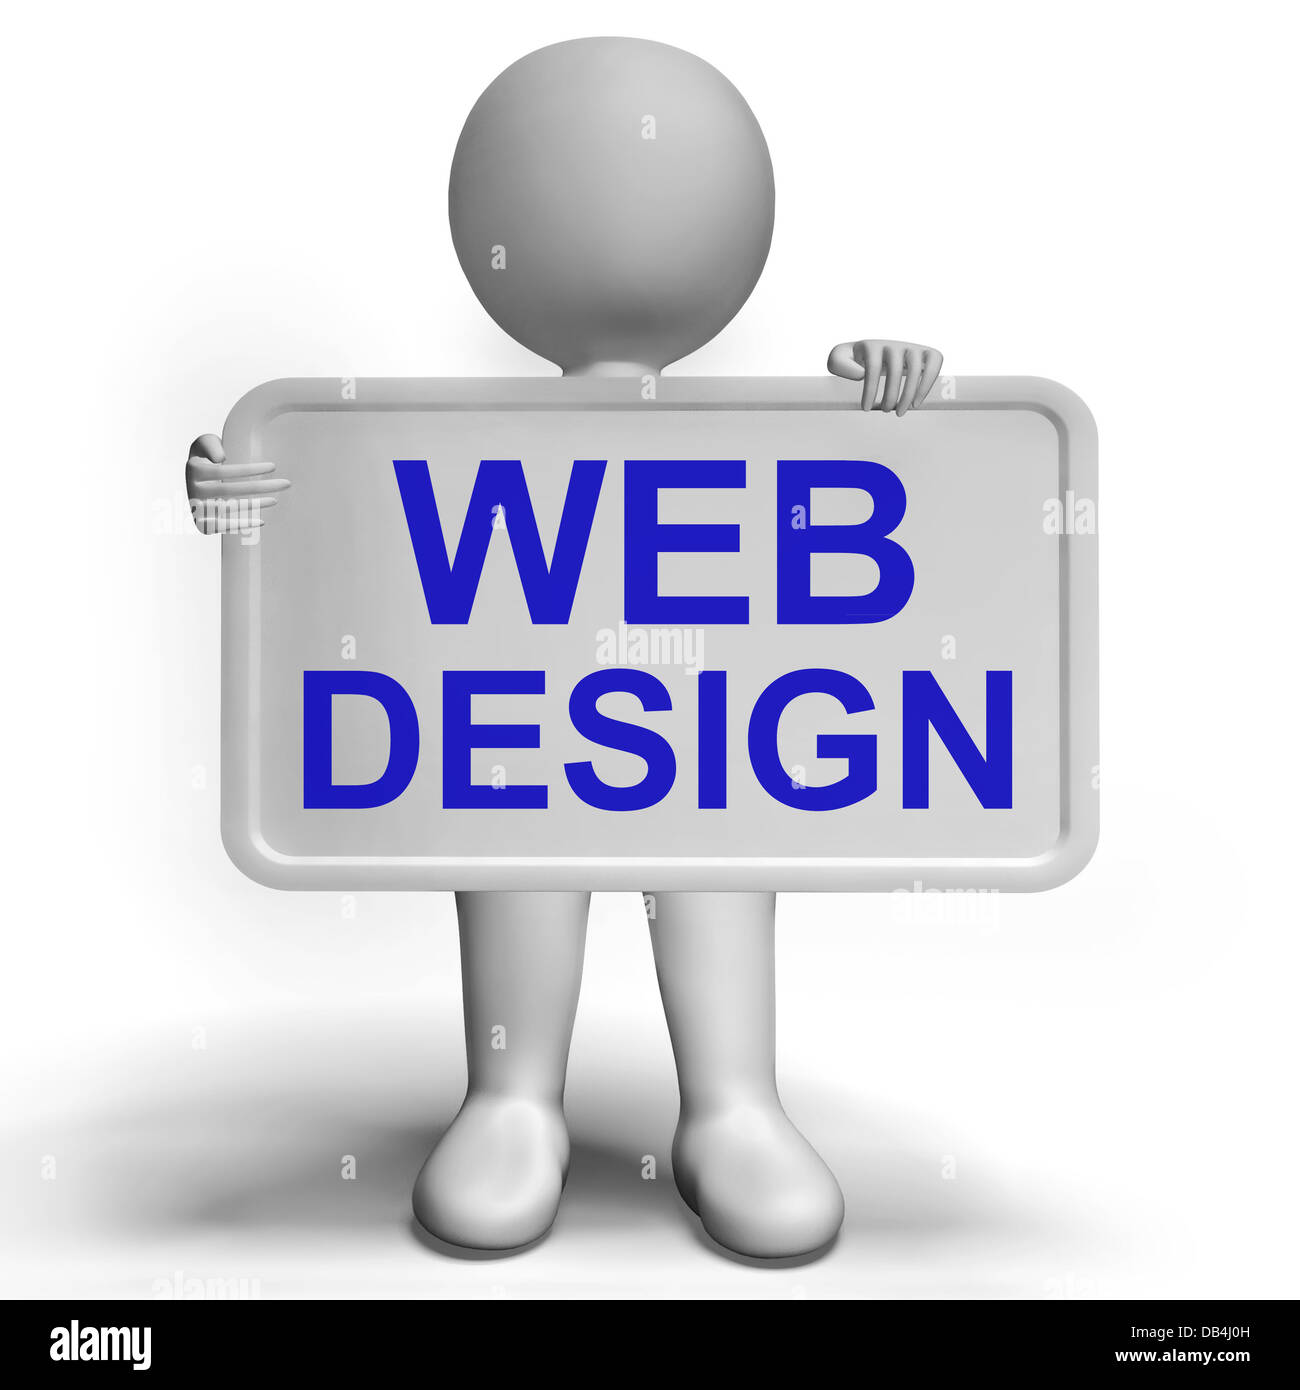 Web Design Sign Shows Creativity And Web Concepts Stock Photo